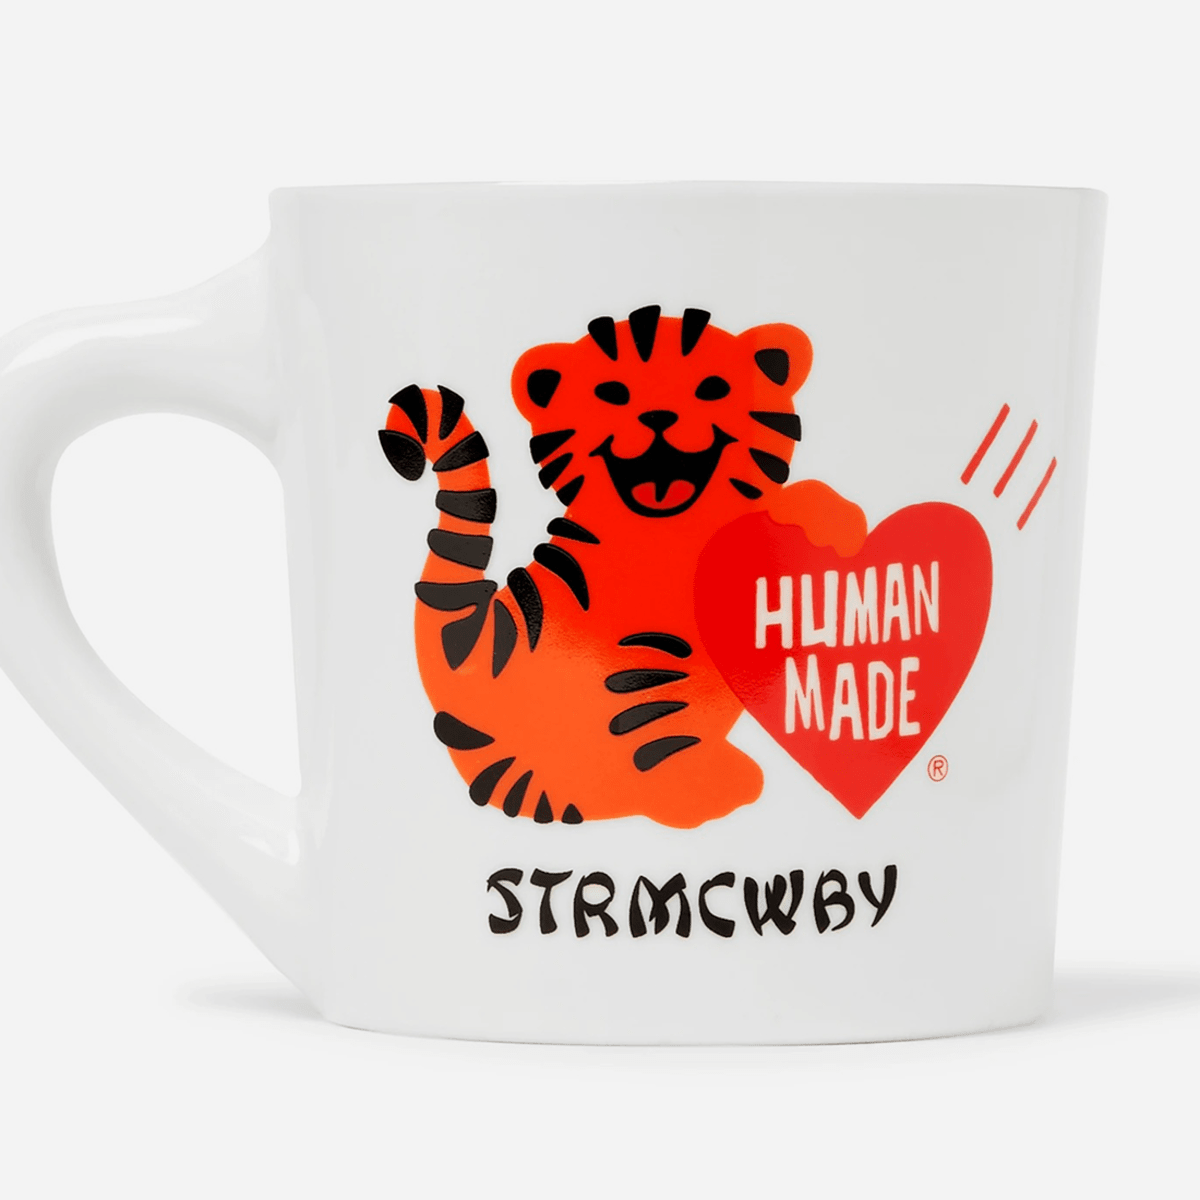 Five Coffee Mugs to Brighten Up Your Mornings - Airows